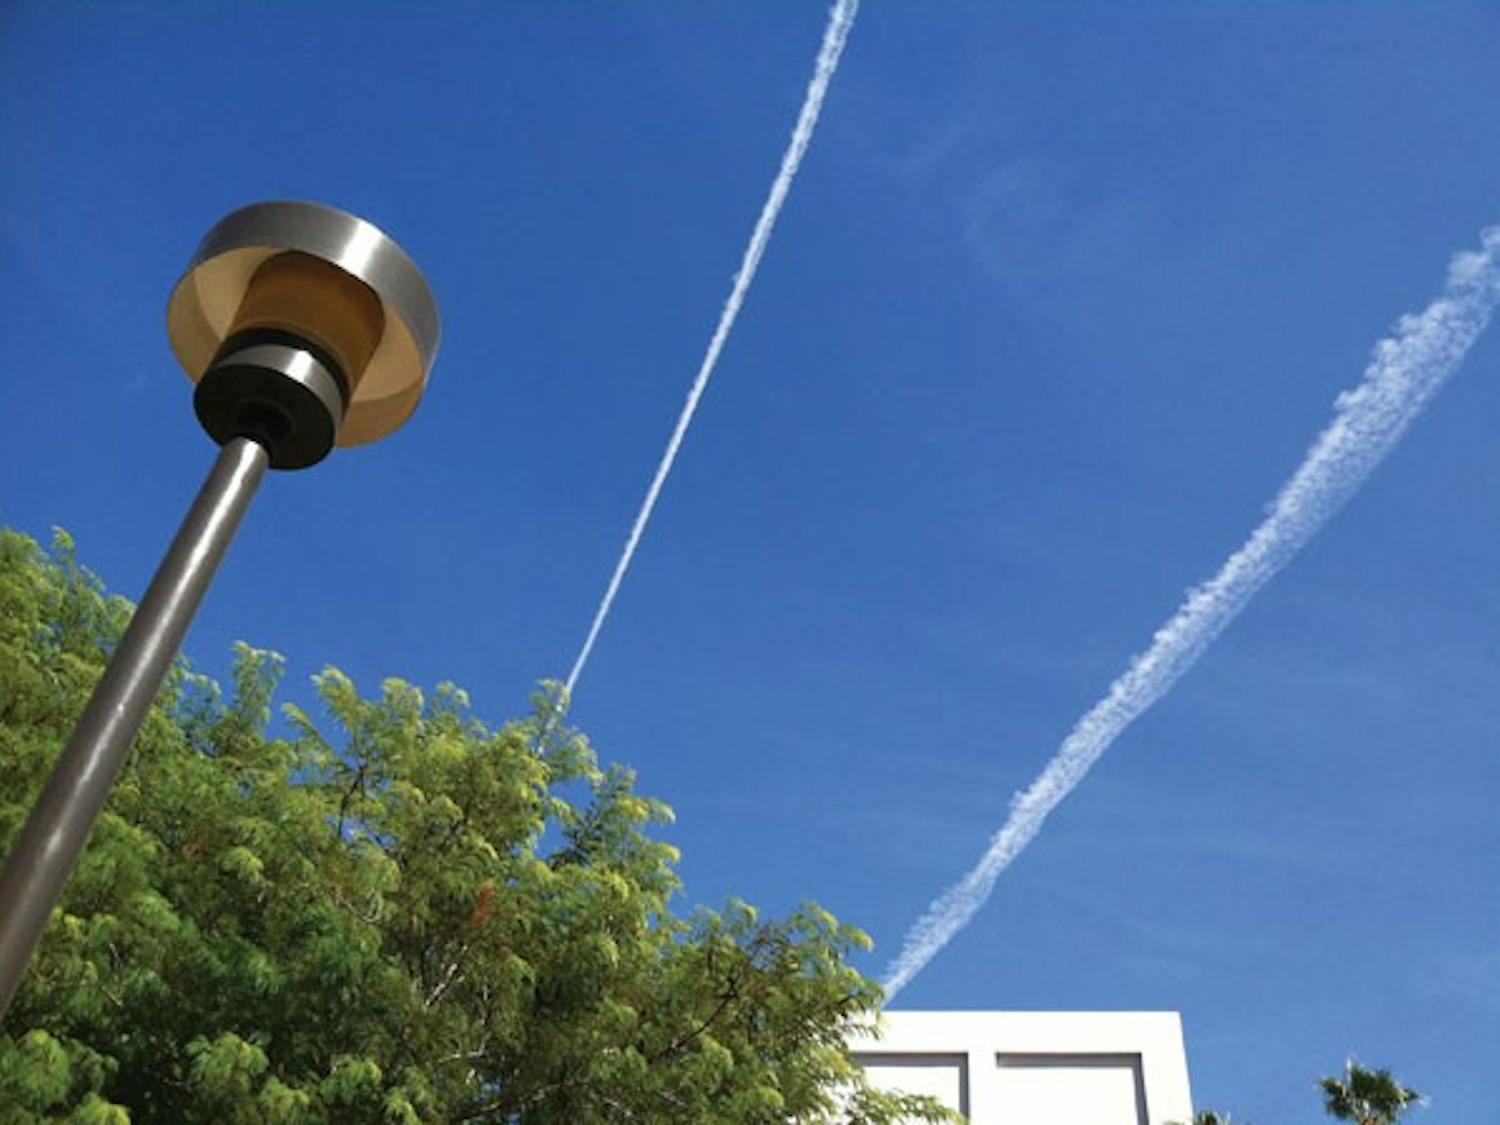 Contrails streak the blue sky on a warm fall afternoon. (Photo by Robin Kiyutelluk)